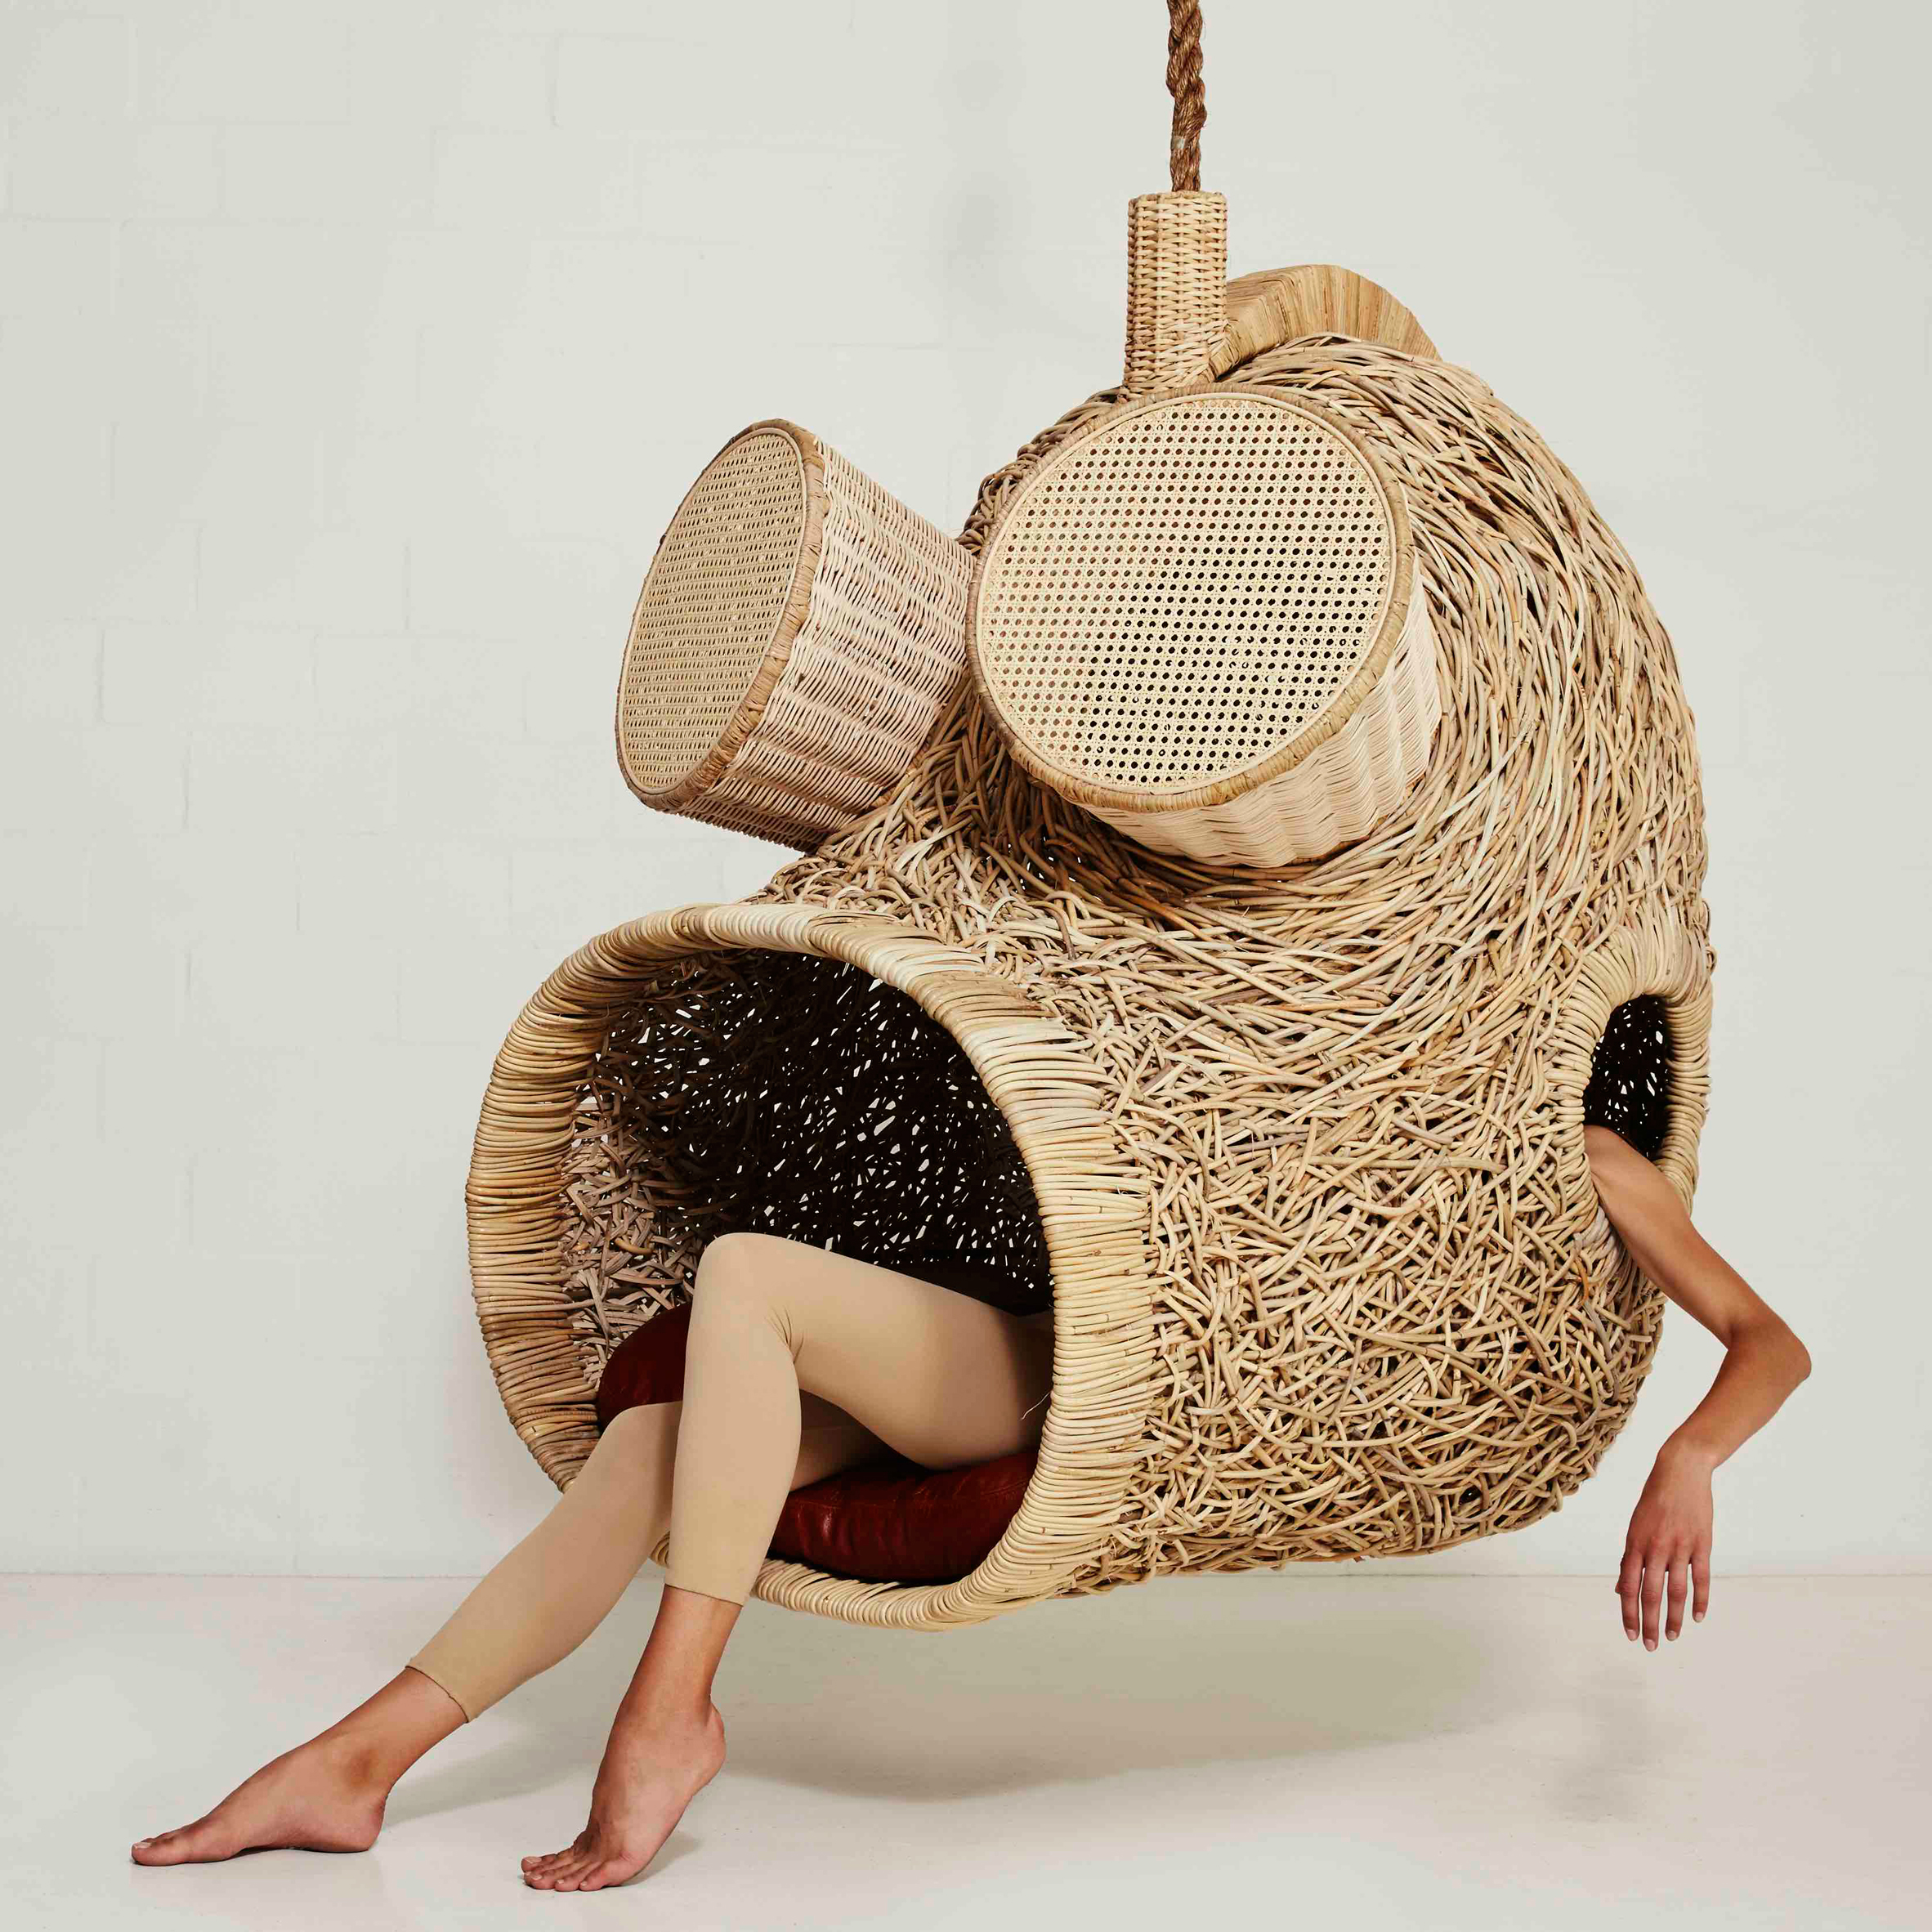 Porky Hefer Exhibits Human Sized Nests Made From Woven Plants Stalks